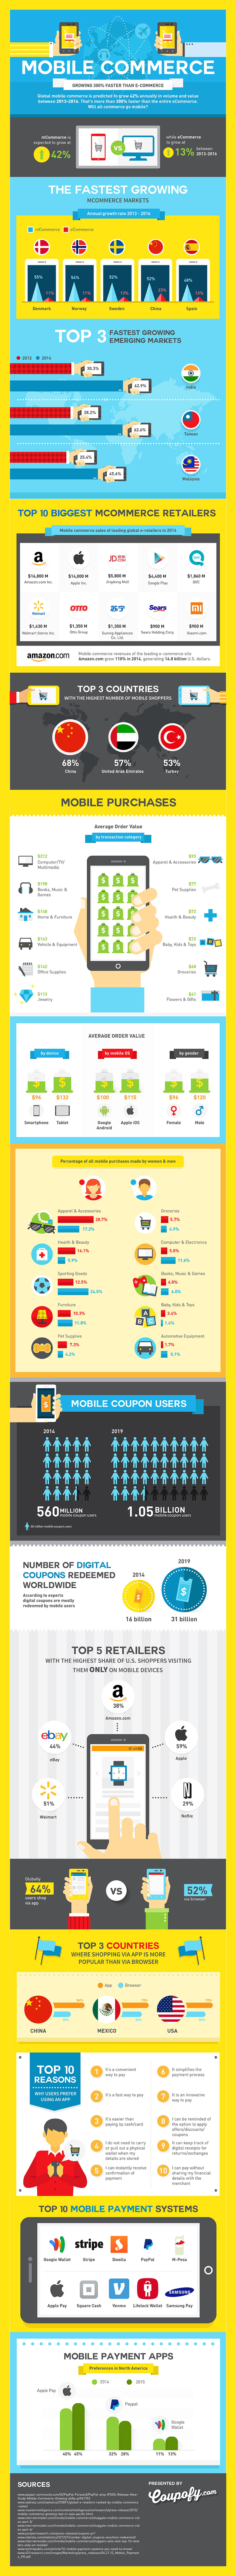 Mobile Commerce Growing Faster than eCommerce Infographic